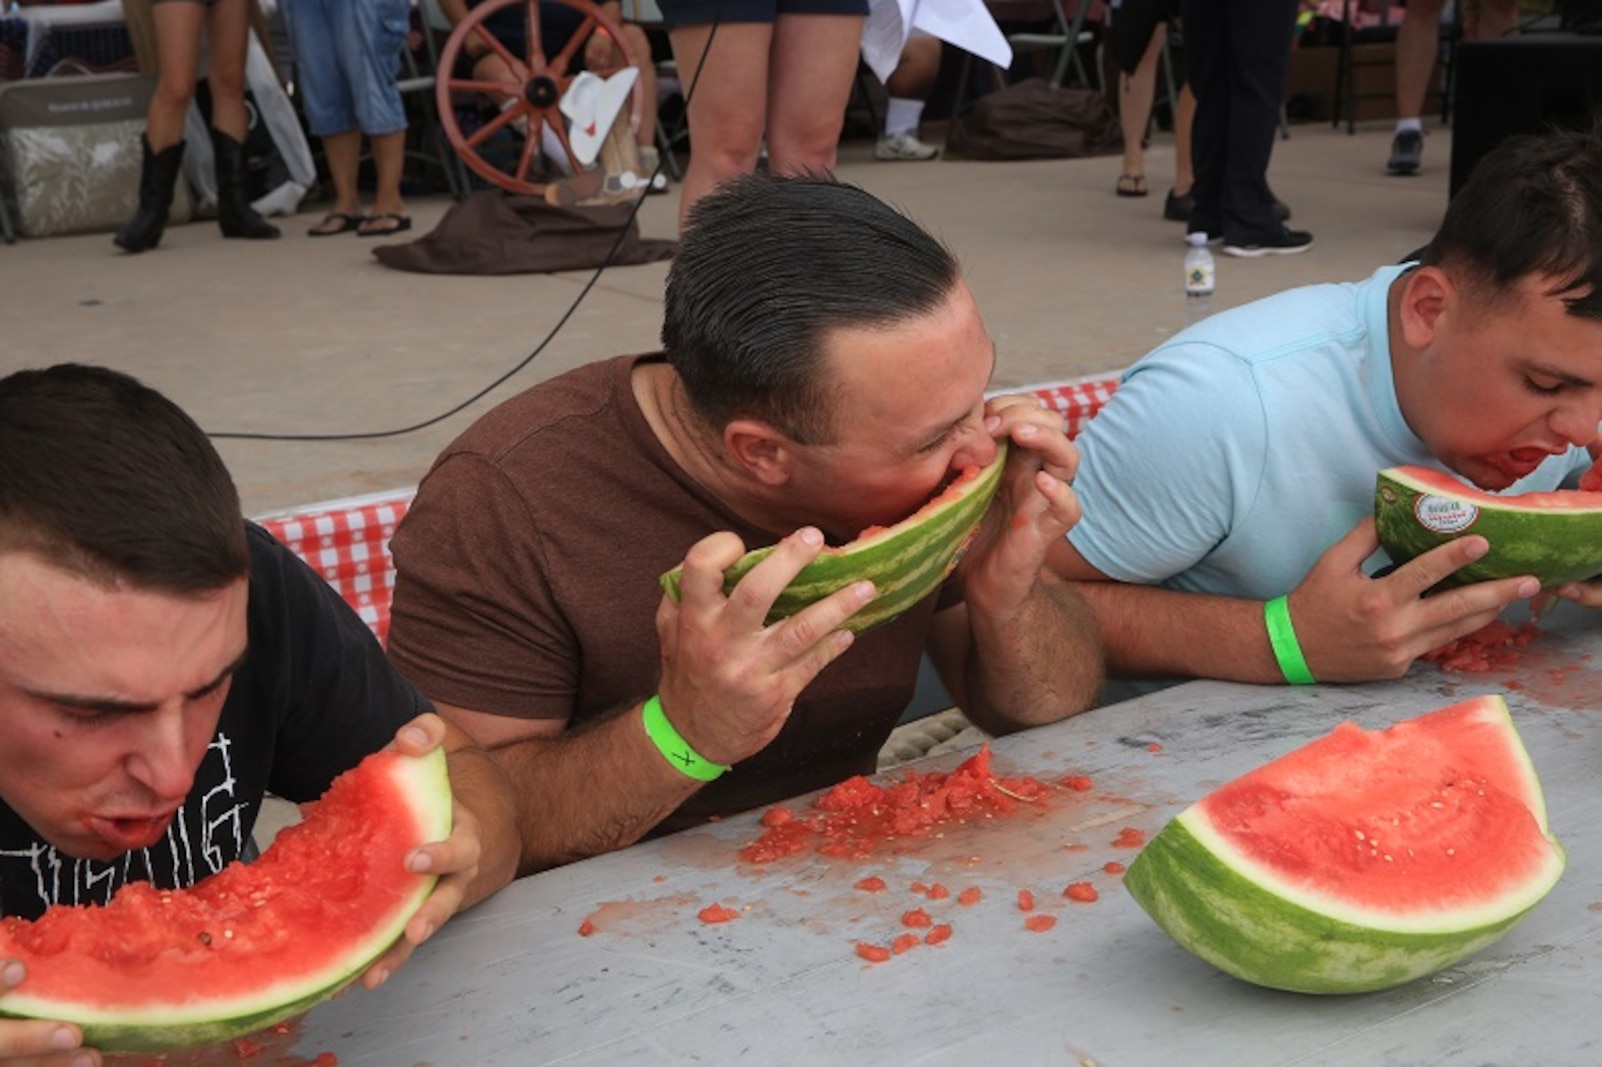 On 12 August 2017, the Marines, Sailors and families of 3d Assault Amphibian Battalion enjoyed some fun in the sun during the annual Gator Bash celebration. Service members and their families competed for thousands of dollars of donated items in watermelon eating contests, dance
competitions, and more. Special guests included Commanding General of 1st Marine Division, Major General Eric M. Smith and his wife Trish, as well as Congressman Darrell Issa of California's 49th District.